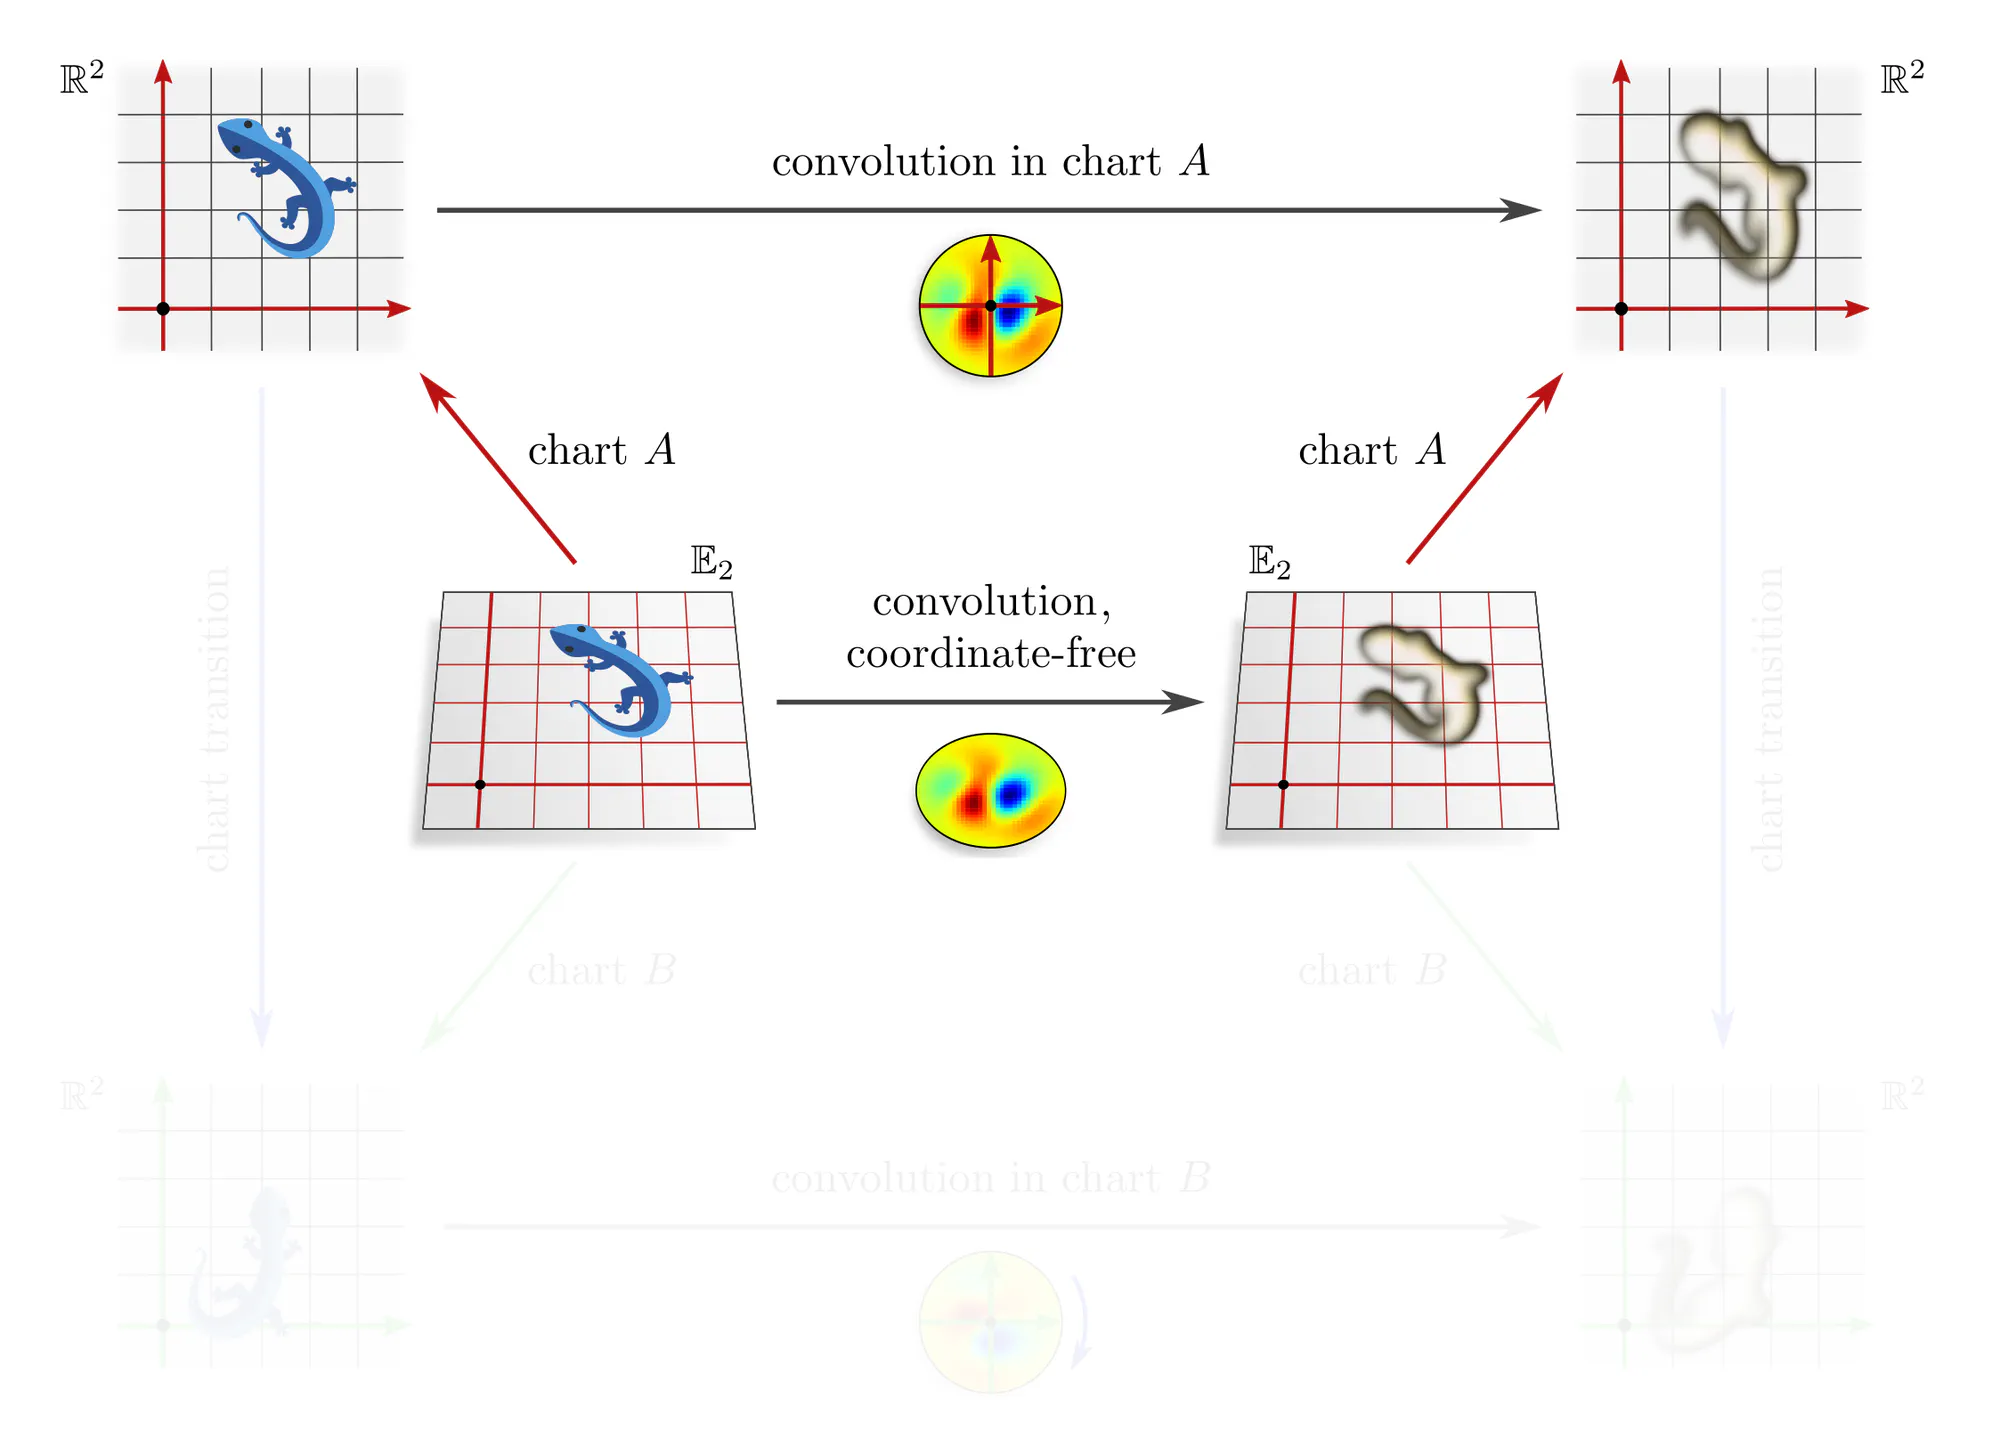 Covariant expression of a convolution operation in different charts, slide 2